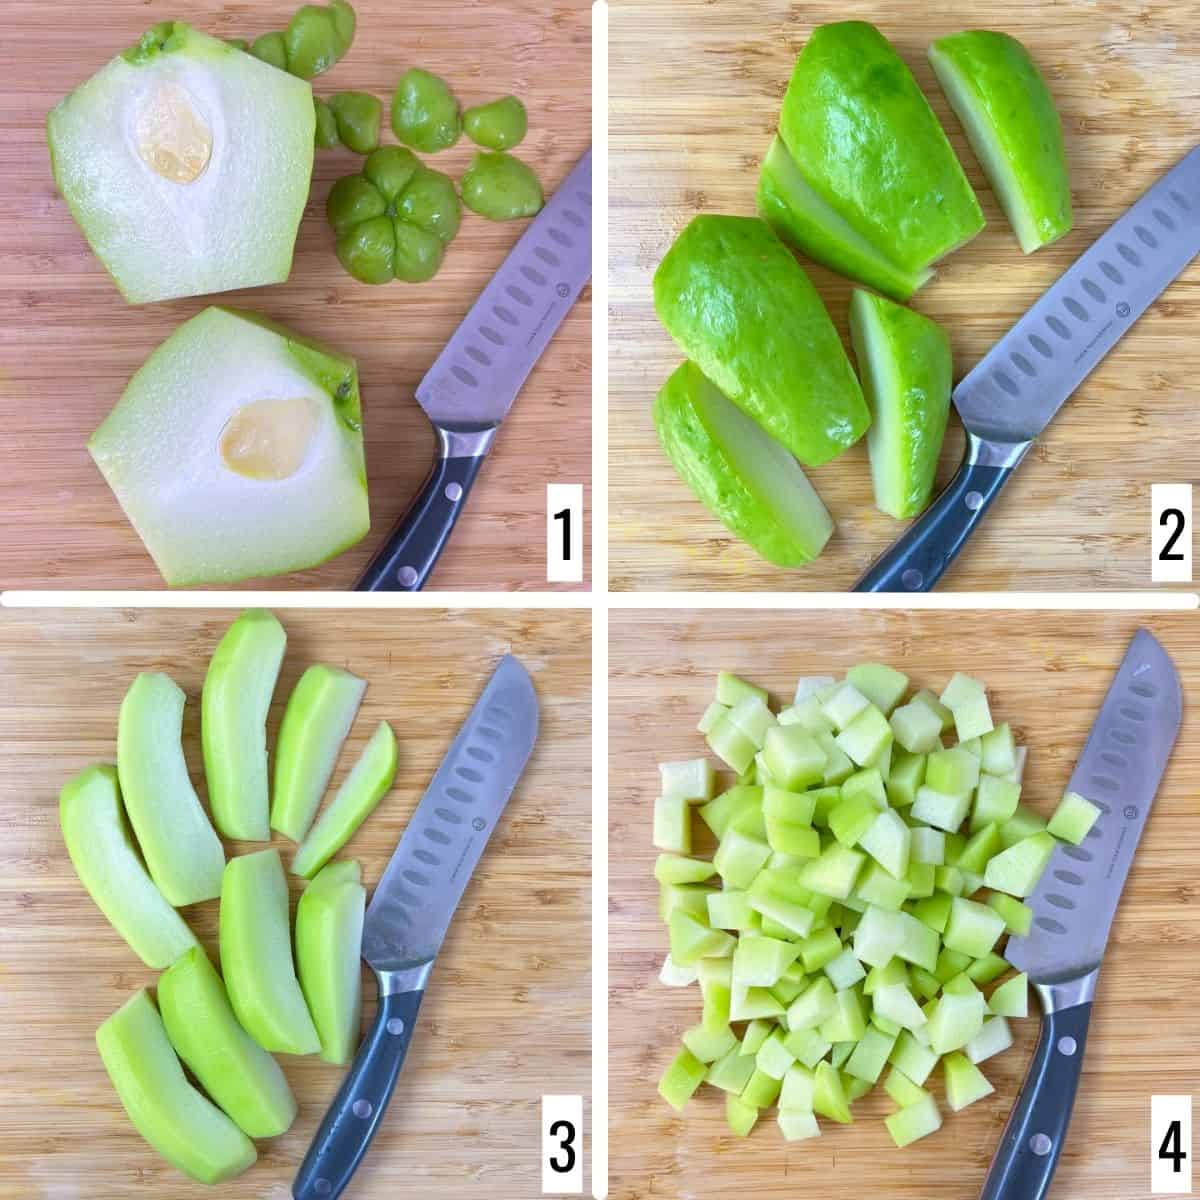 A 4-step collage showing peeling and chopping steps.